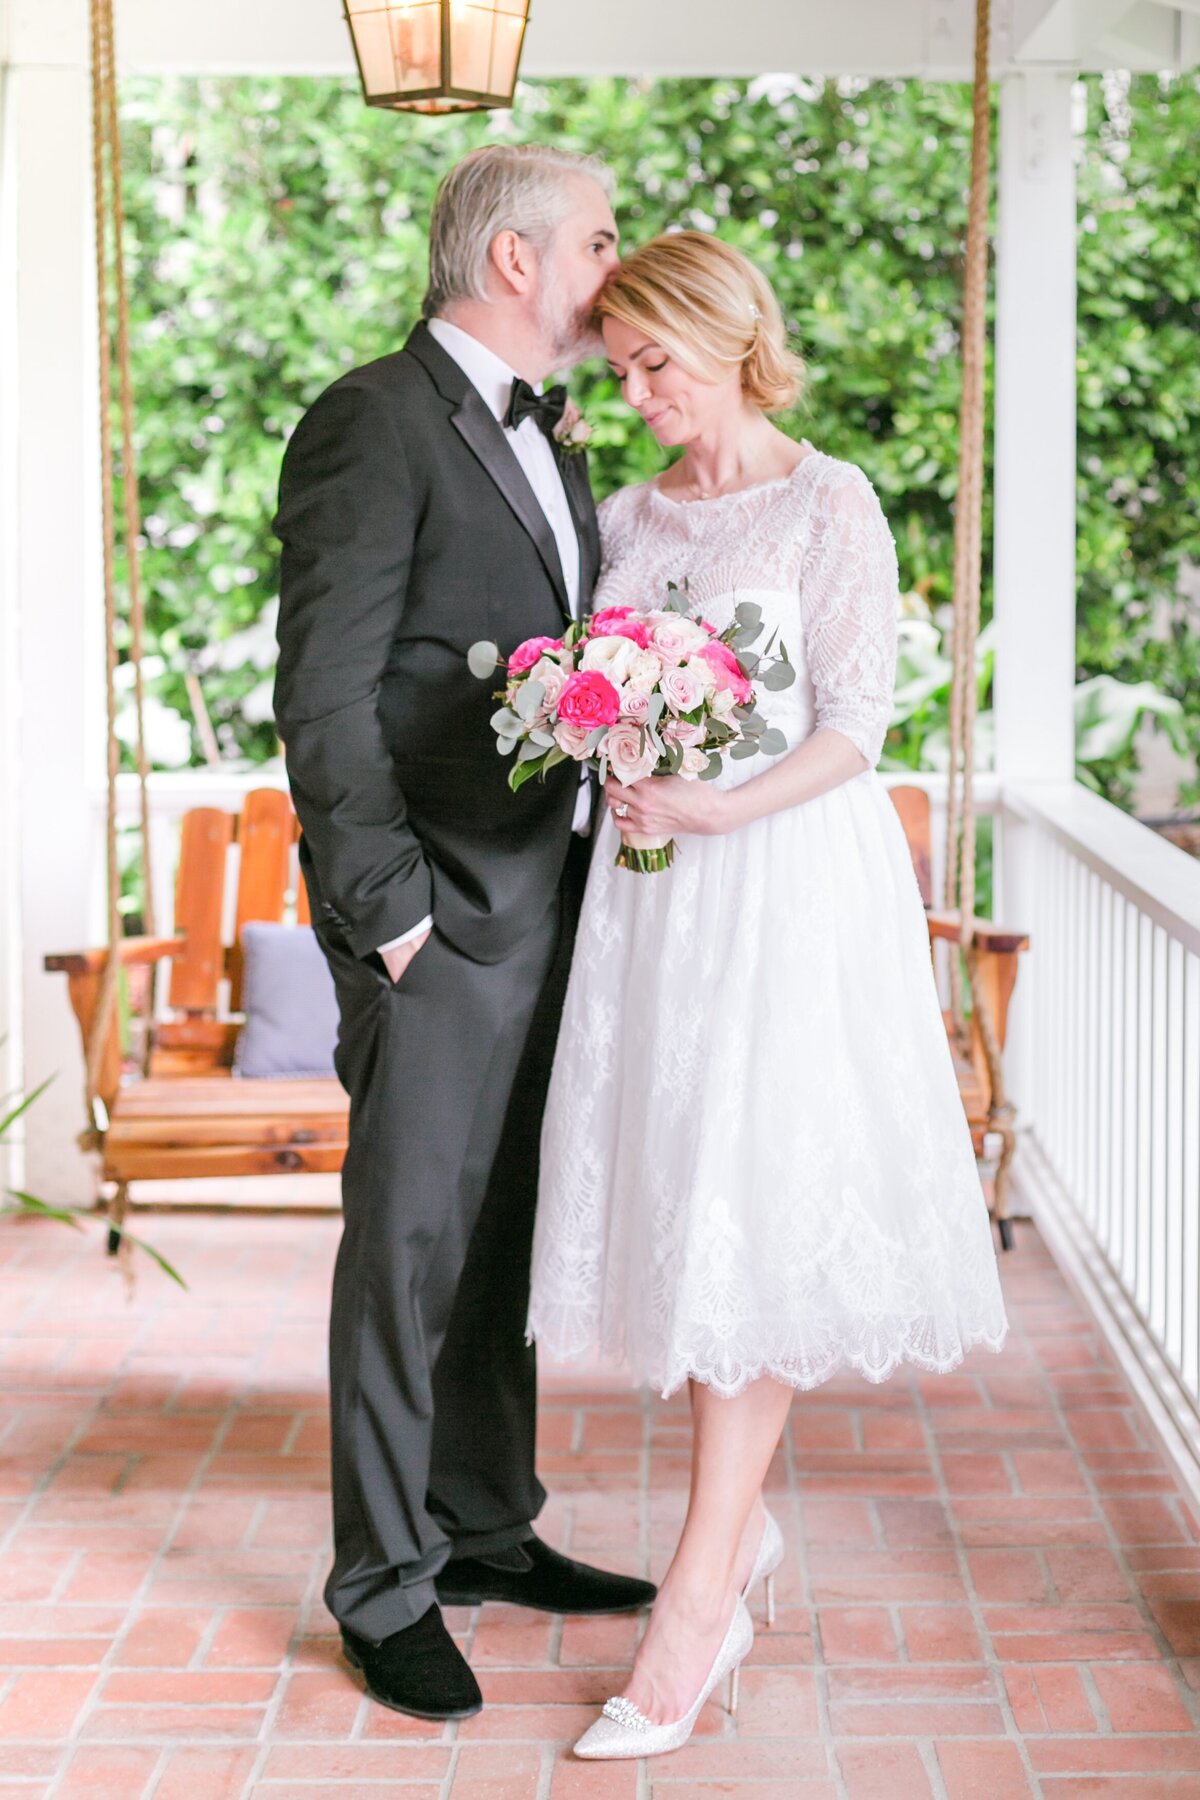 KelliBeePhotography_Vow-Renewal-Hollywood-Hills-Los-Angeles-Bluebell-events-0028